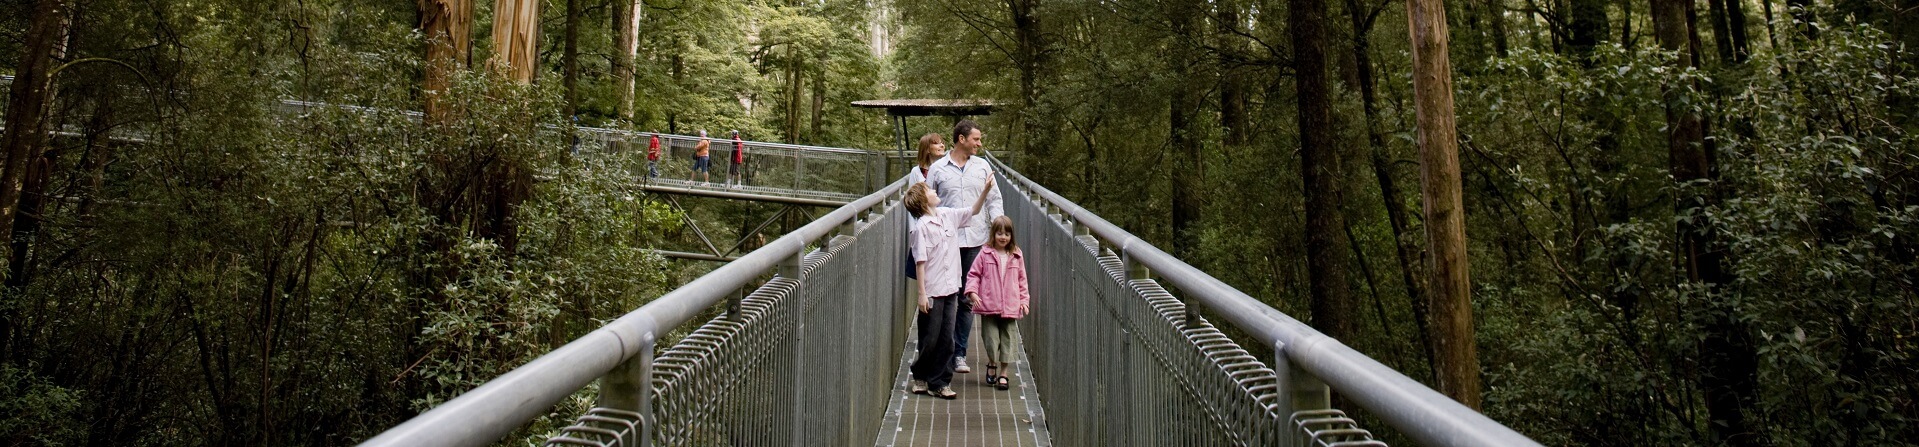 What is the Great Otway National Park known for?